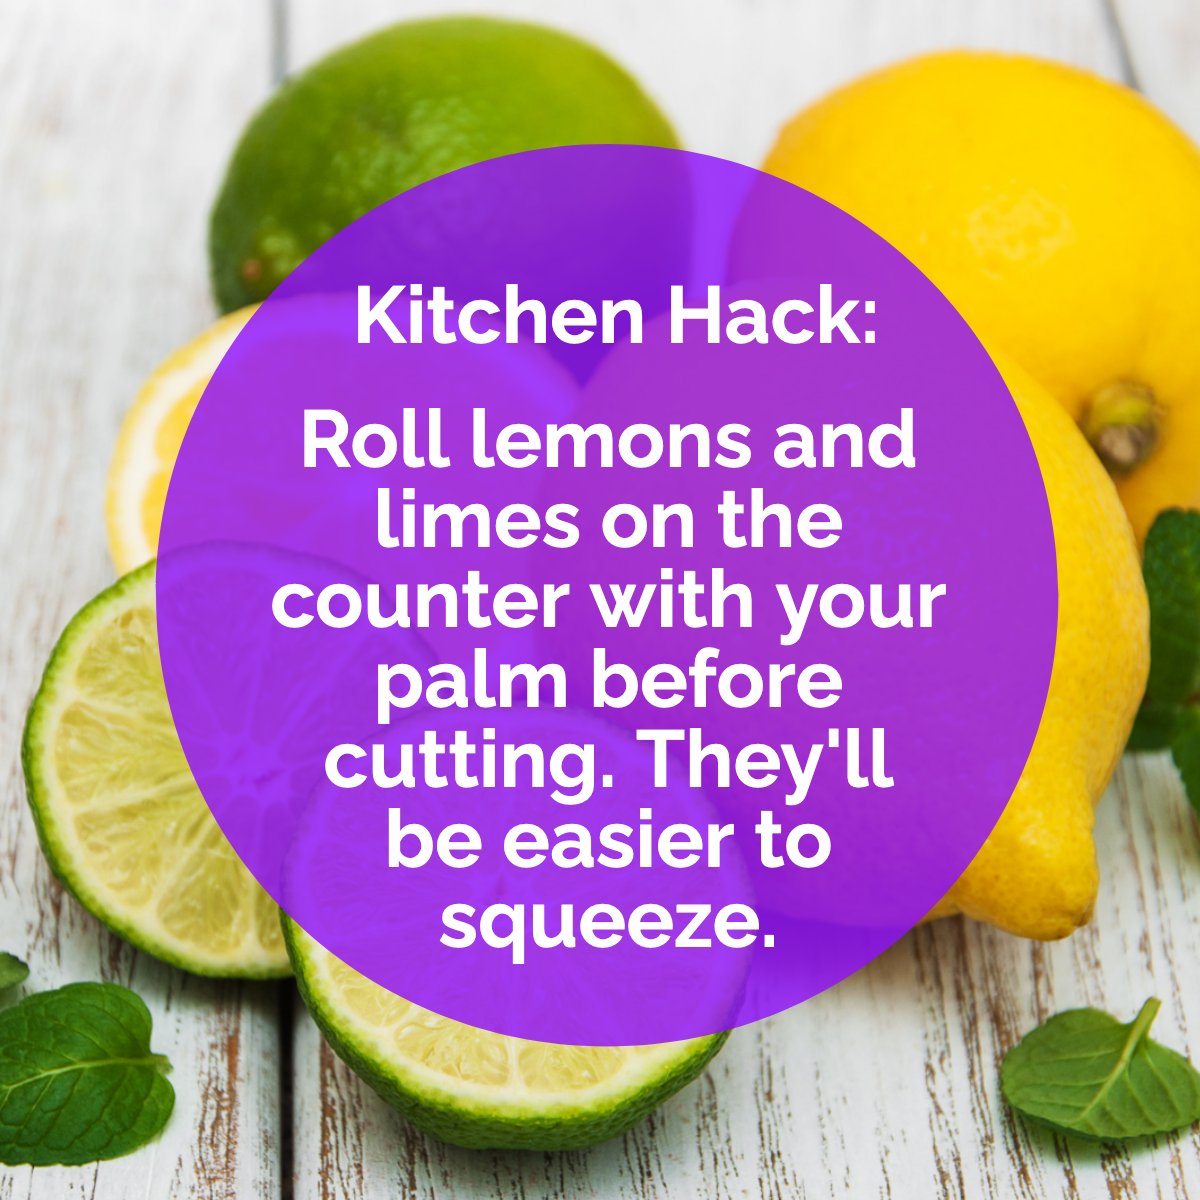 When life gives you lemons 🍋 (or limes)... Roll them on the counter with your palm to soften them up before cutting. They'll be easier to squeeze 💦 (and you'll get a good workout!) Do you have a favorite #lifehack? Drop it in the comments! #lemons #lemon